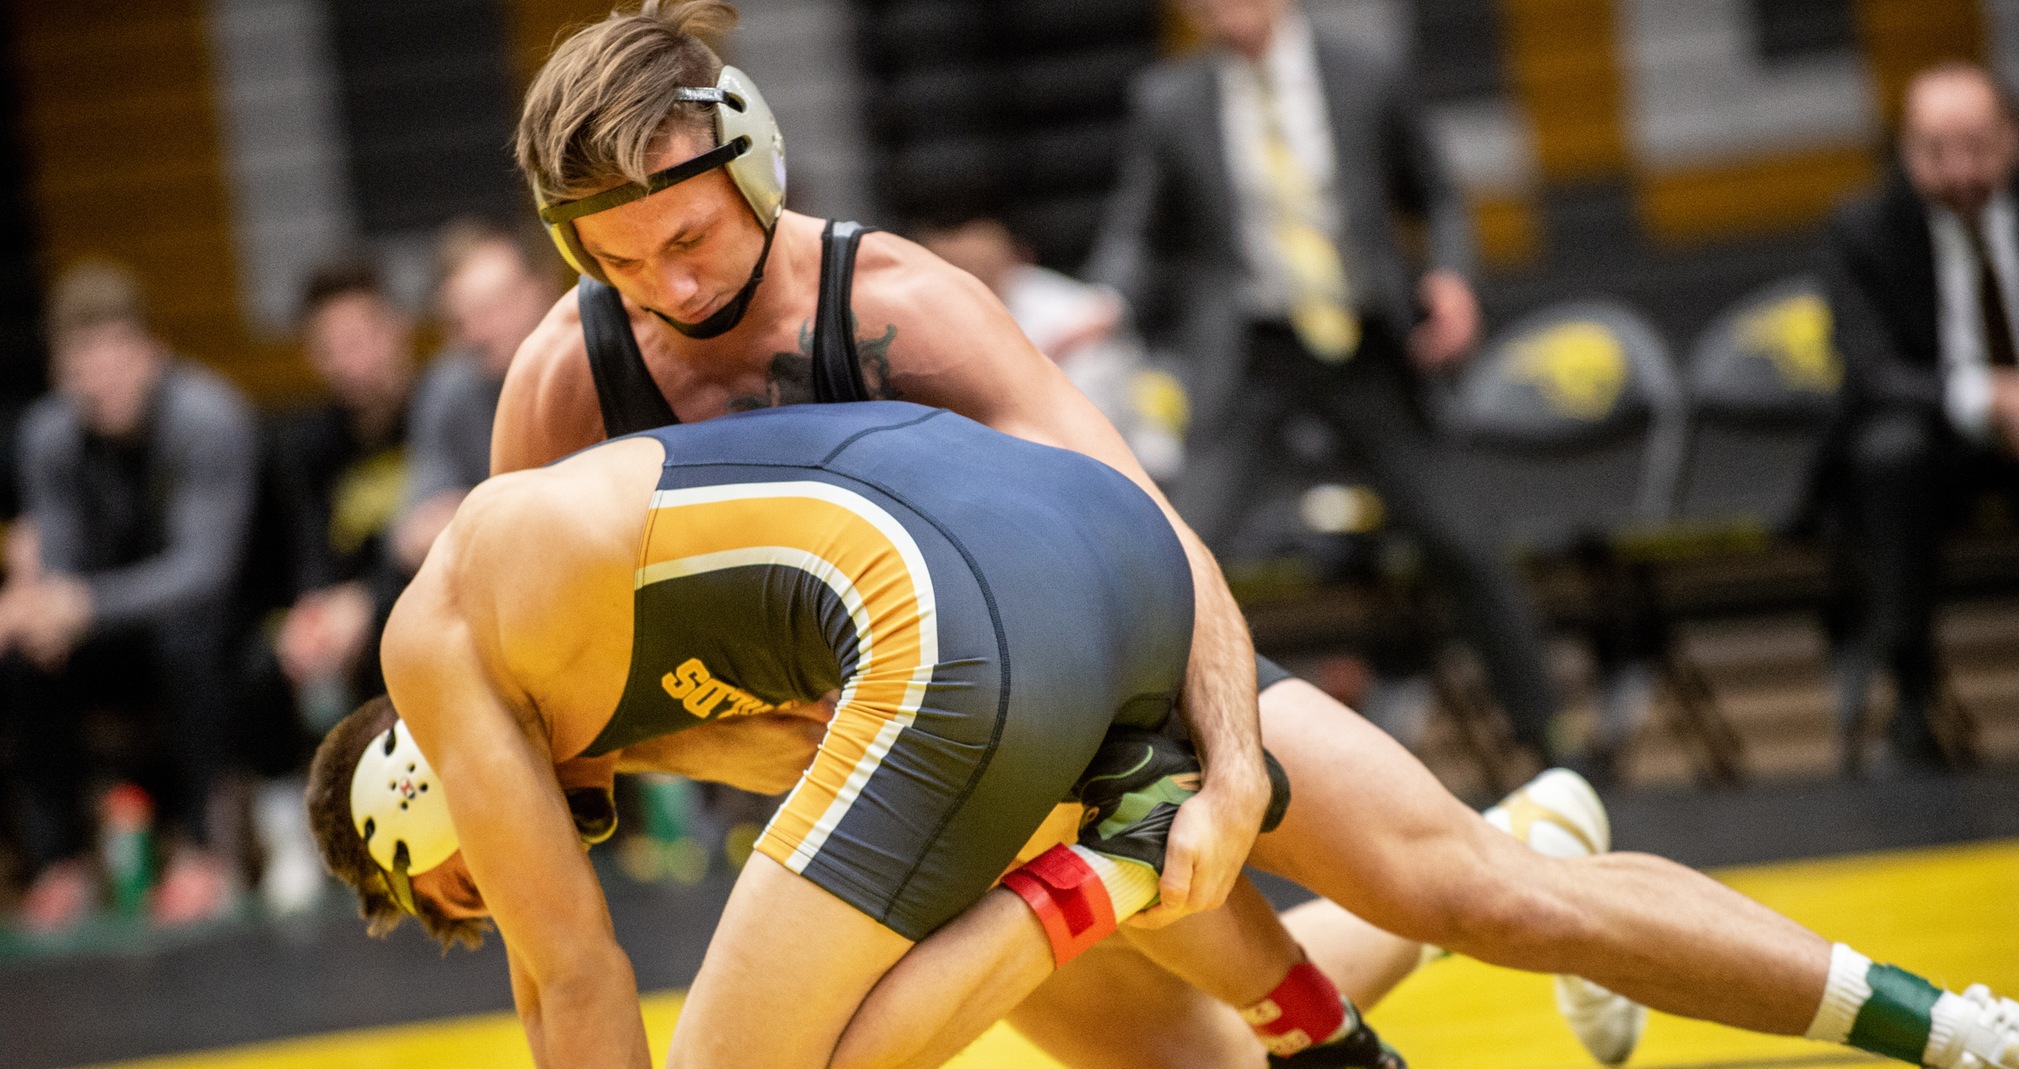 Mark Choinski won the 165-pound title to become a two-time Milwaukee School of Engineering Invitational champion.